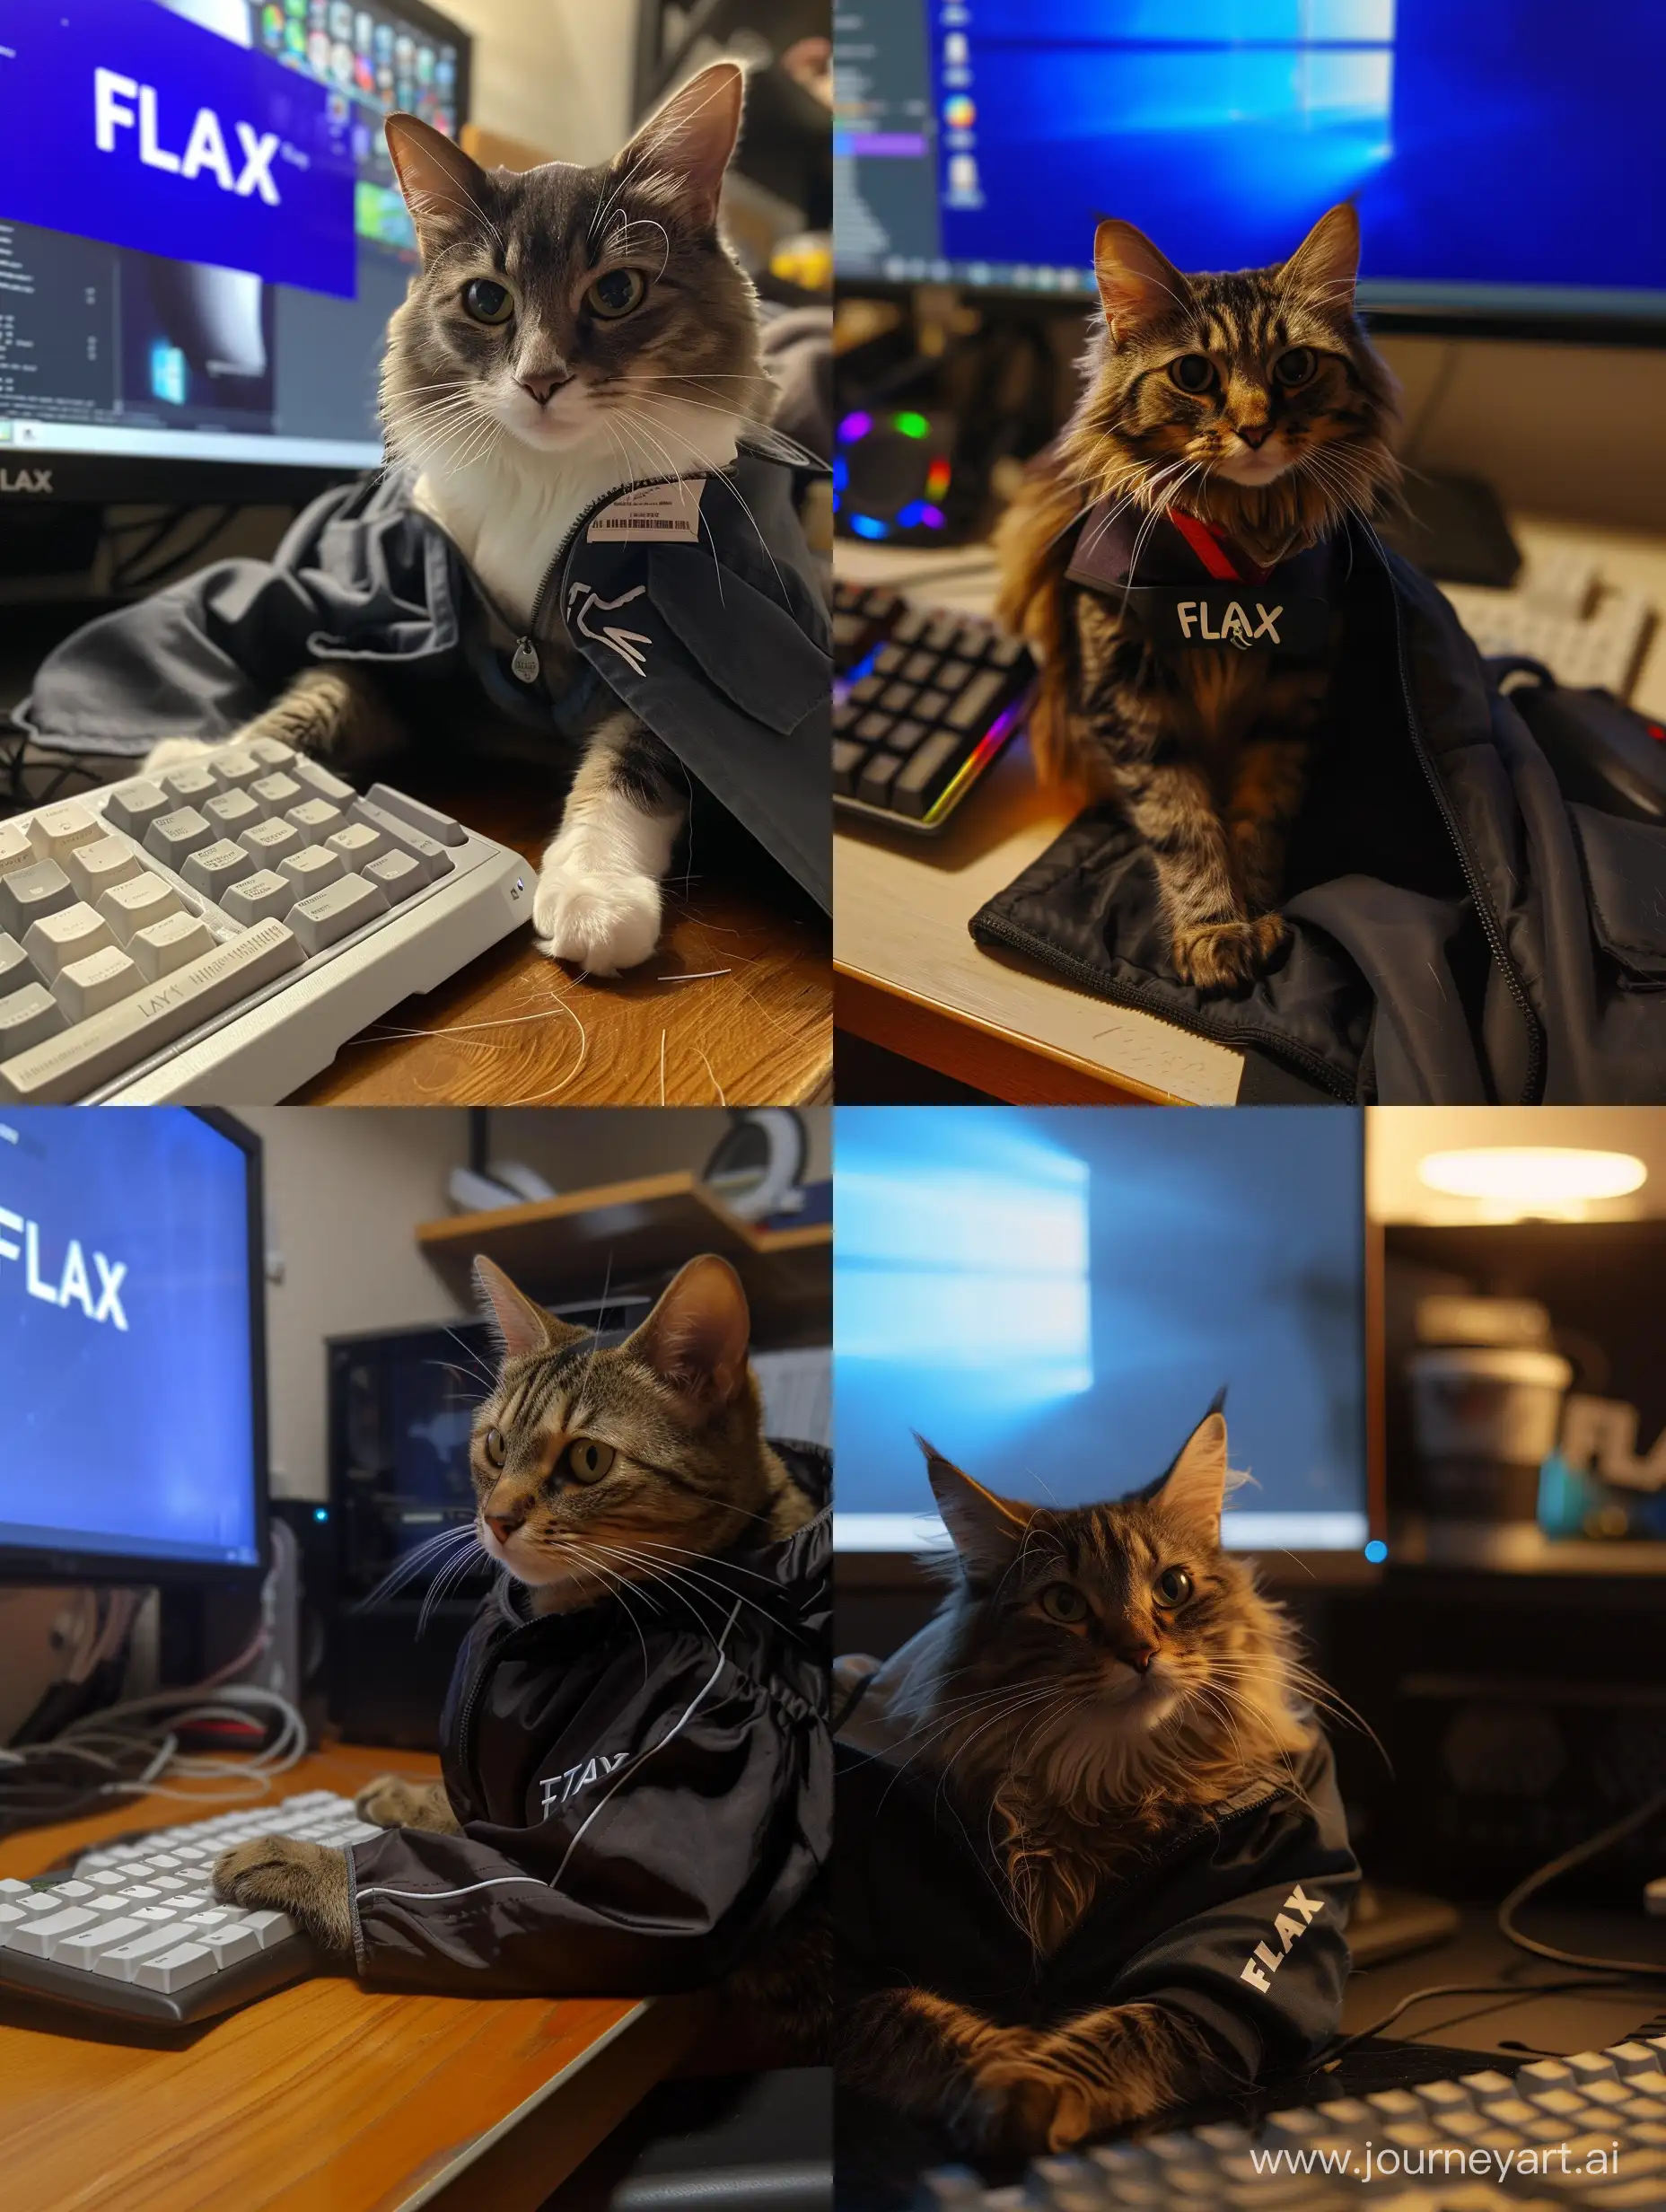 Clever-Cat-Typing-on-Computer-with-FLAX-Jacket